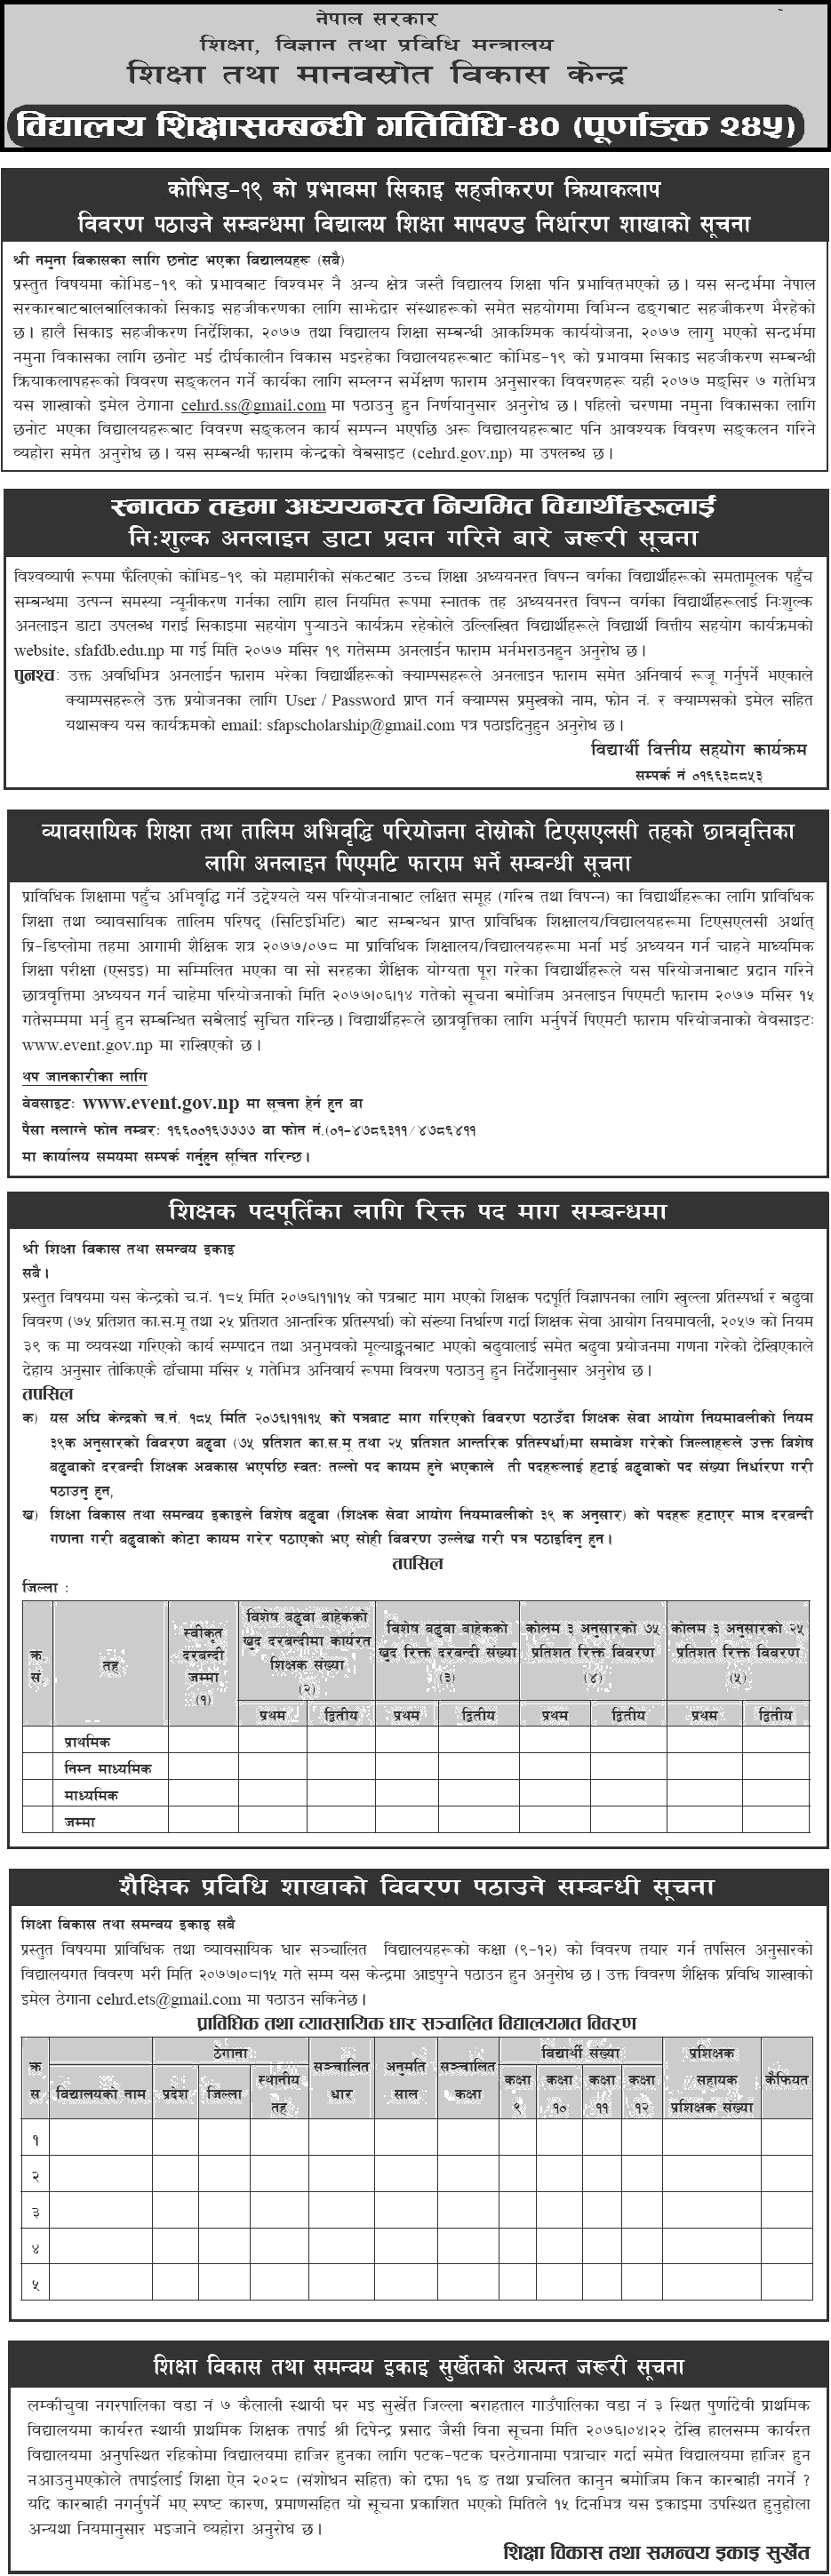 Ministry of Education Published Bulletin 2077 Mangsir 4